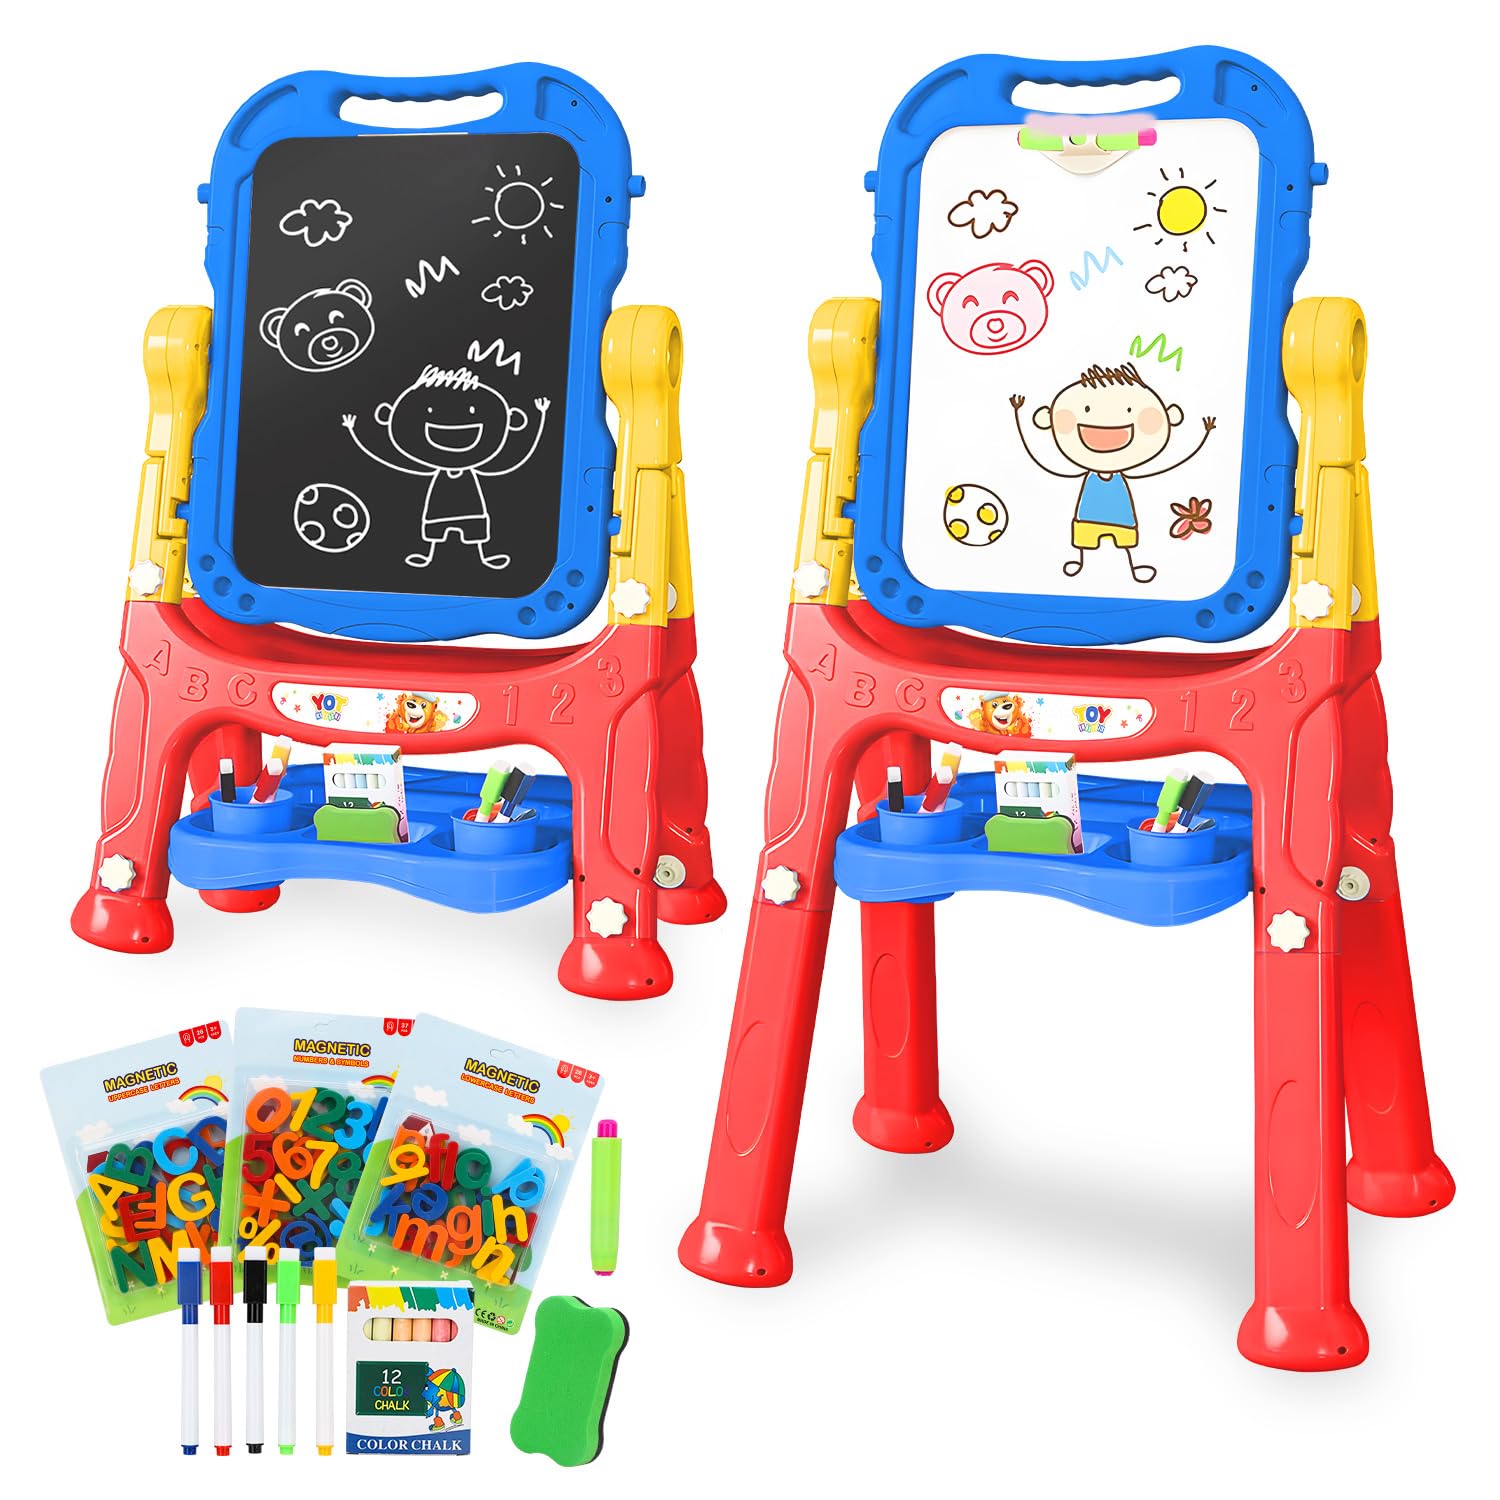 TOY Life Easel for Kids Art Easel for Toddler Easel - 4in1 Double-Sided Large Magnetic Board Kids Chalkboard Easel Drawing White Board for Kids Magnetic Letters & Numbers Birthday Gifts for Kids